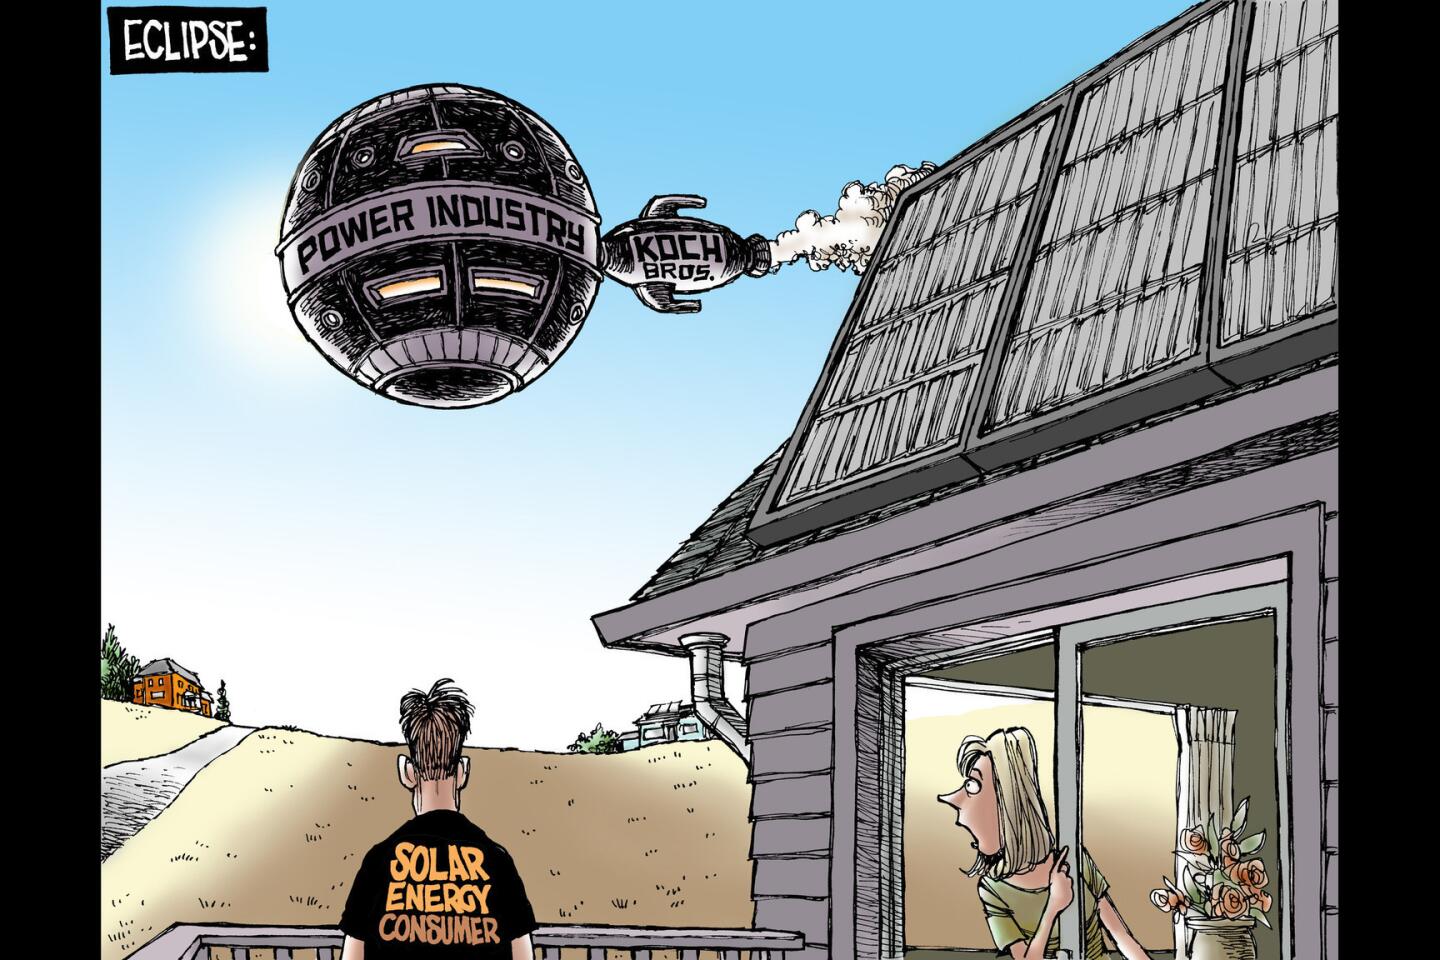 Koch brothers and big utilities campaign to unplug solar power